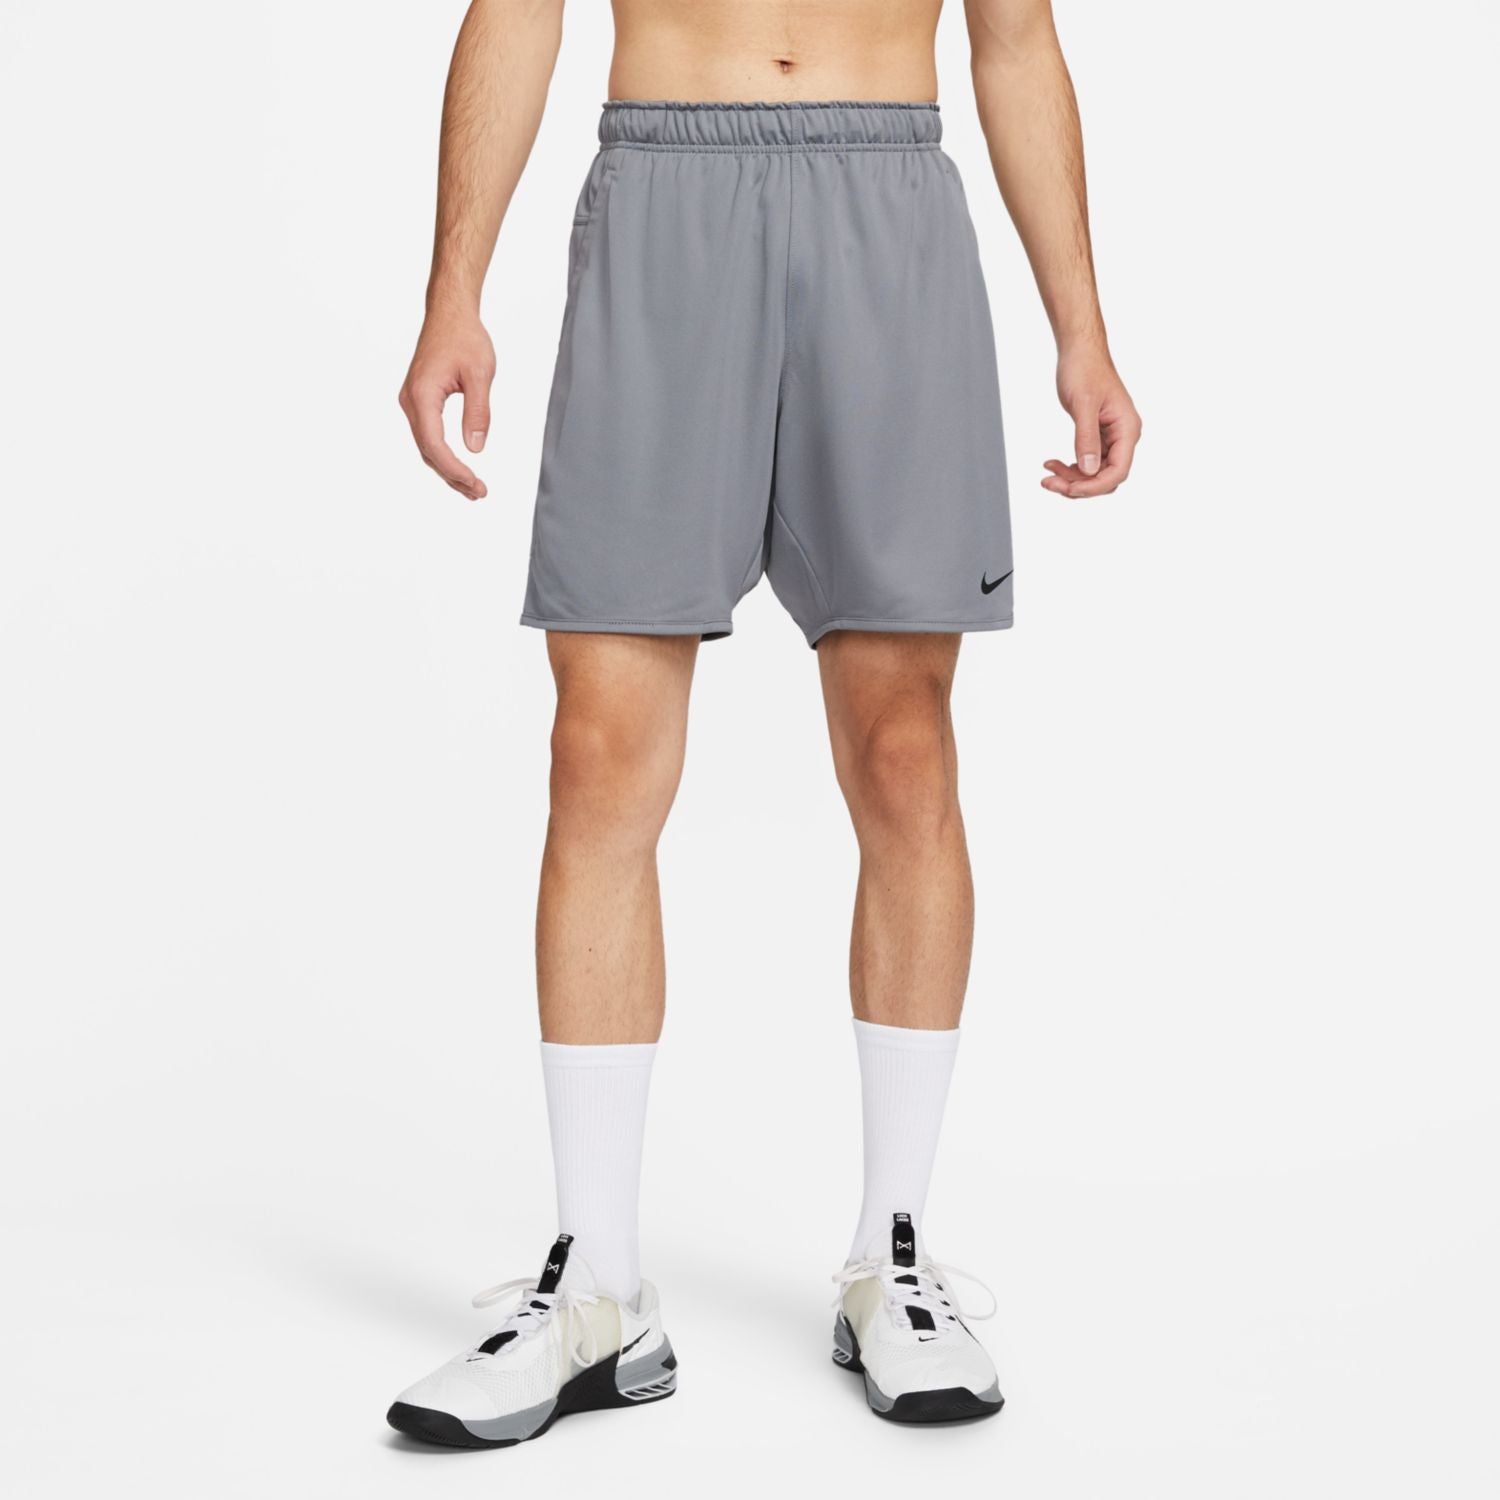 NIKE AS M NK DF TOTALTY KNT 7IN UL FB4197-084 SHORT TRAINING (M)